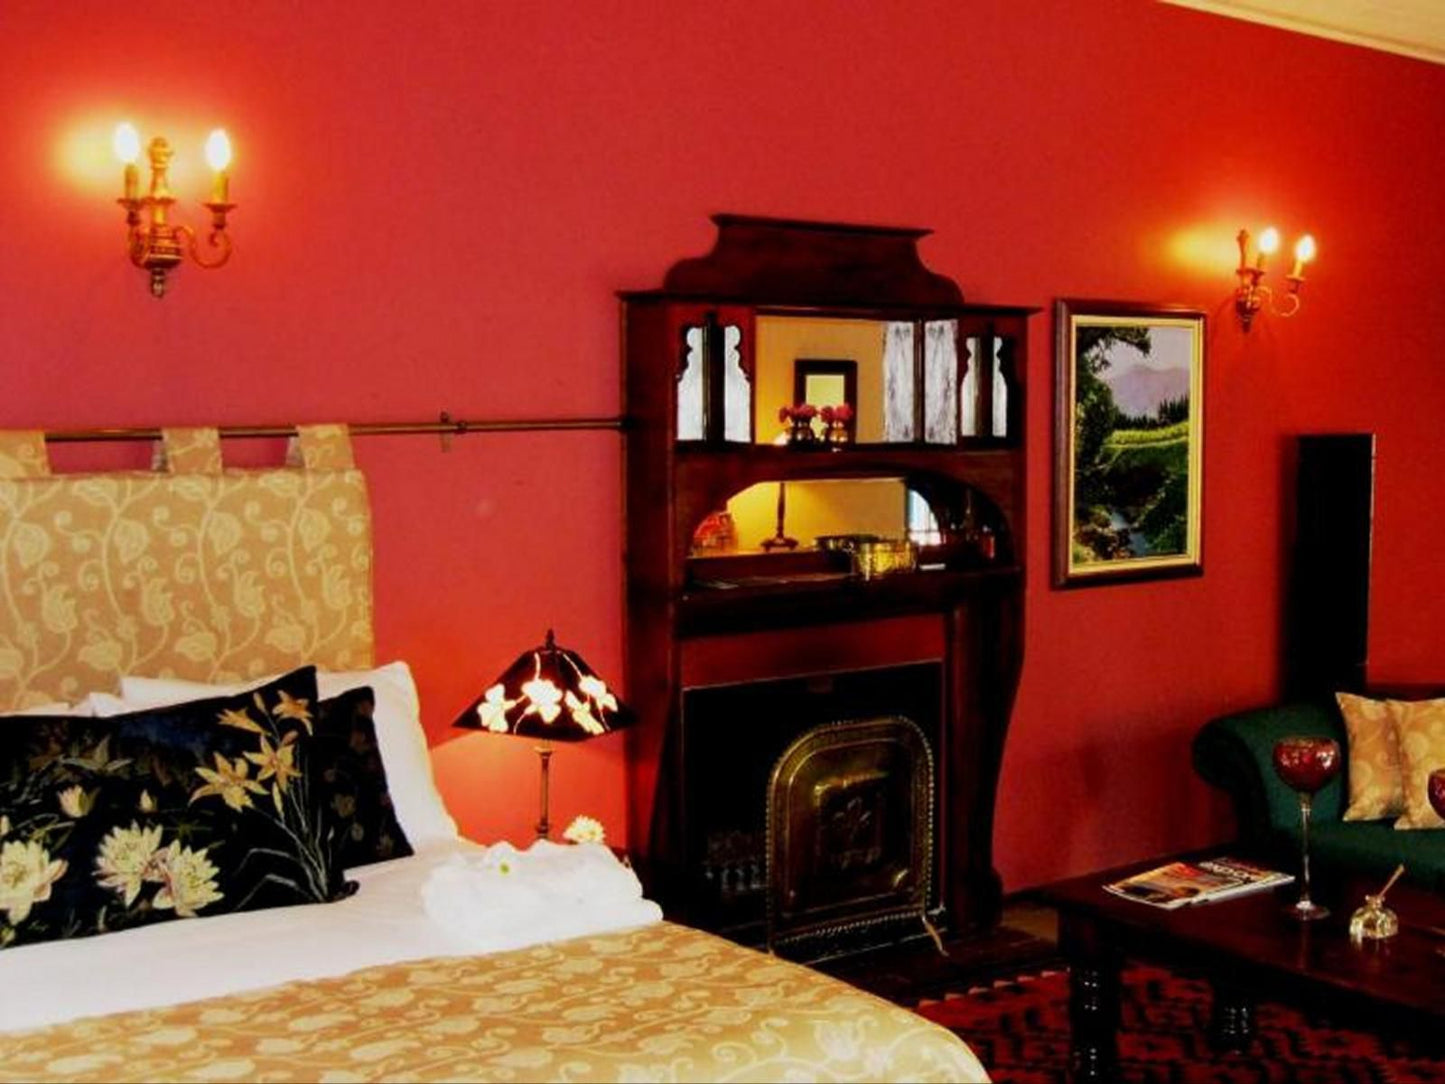 Village Green Guest House Parkview Johannesburg Gauteng South Africa Colorful, Bedroom